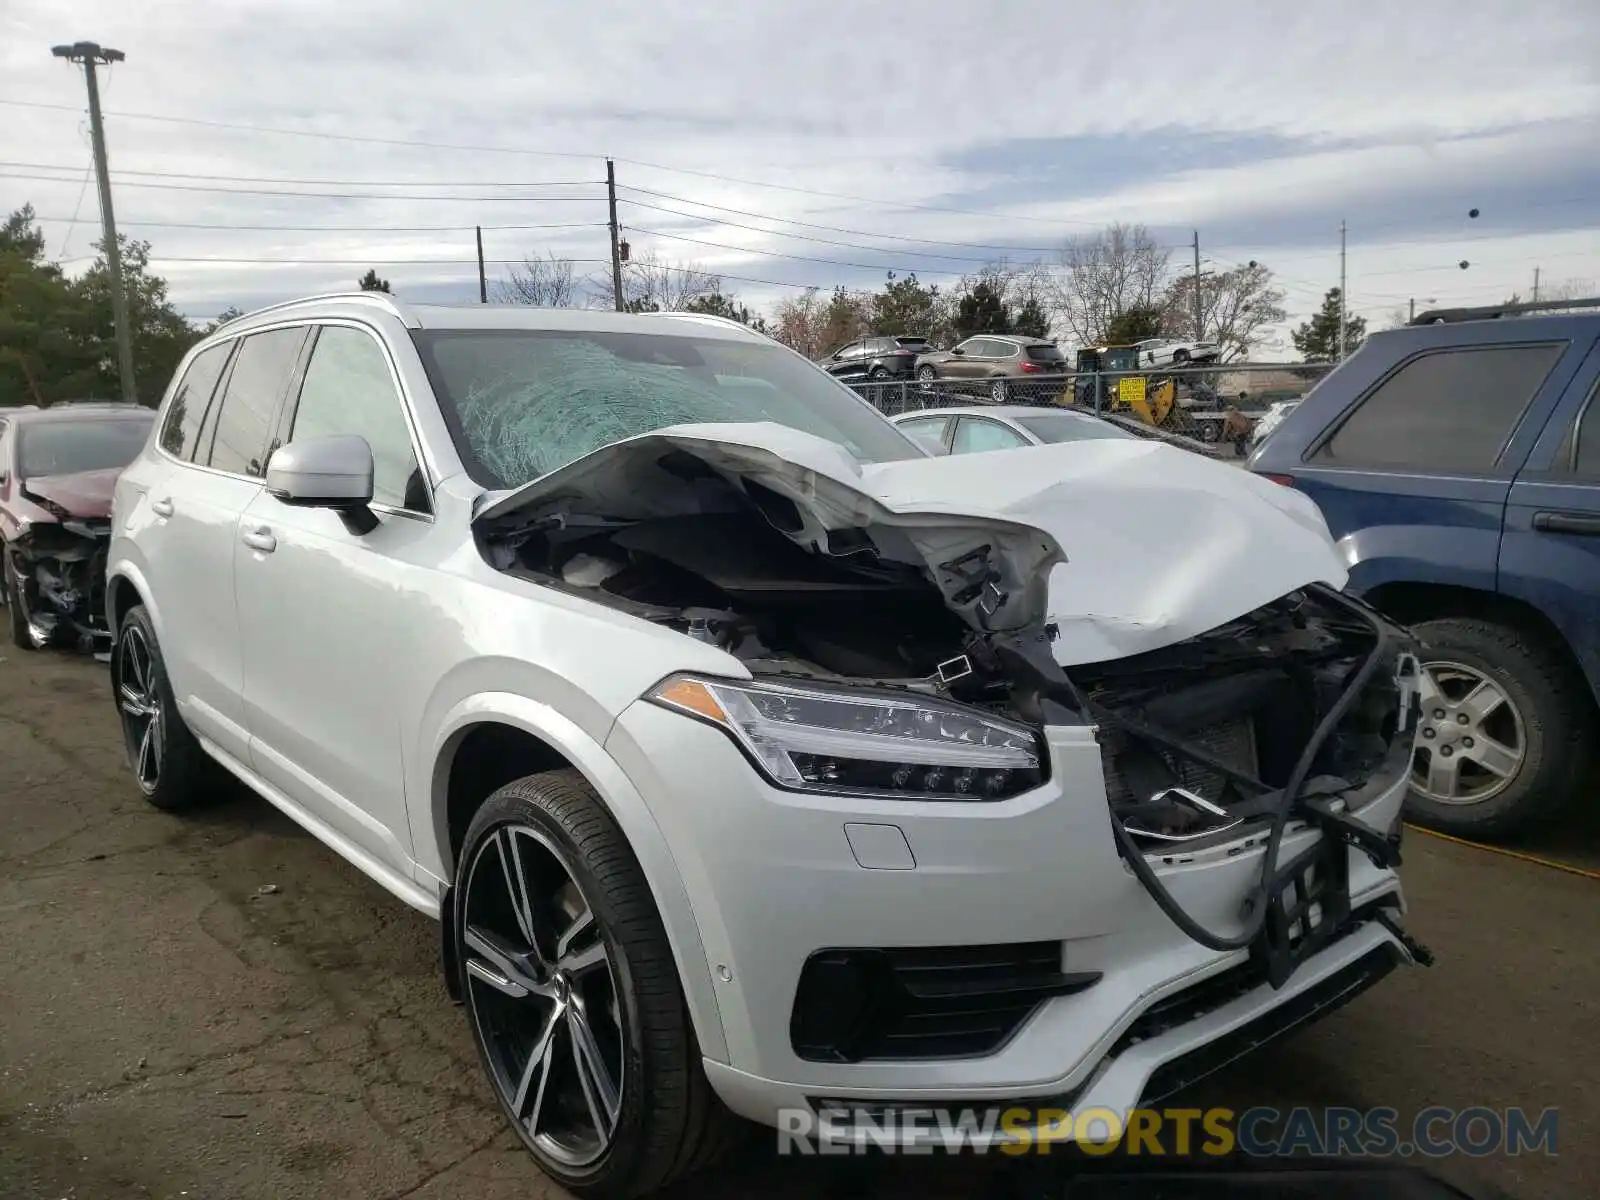 1 Photograph of a damaged car YV4A22PMXK1456925 VOLVO XC90 2019